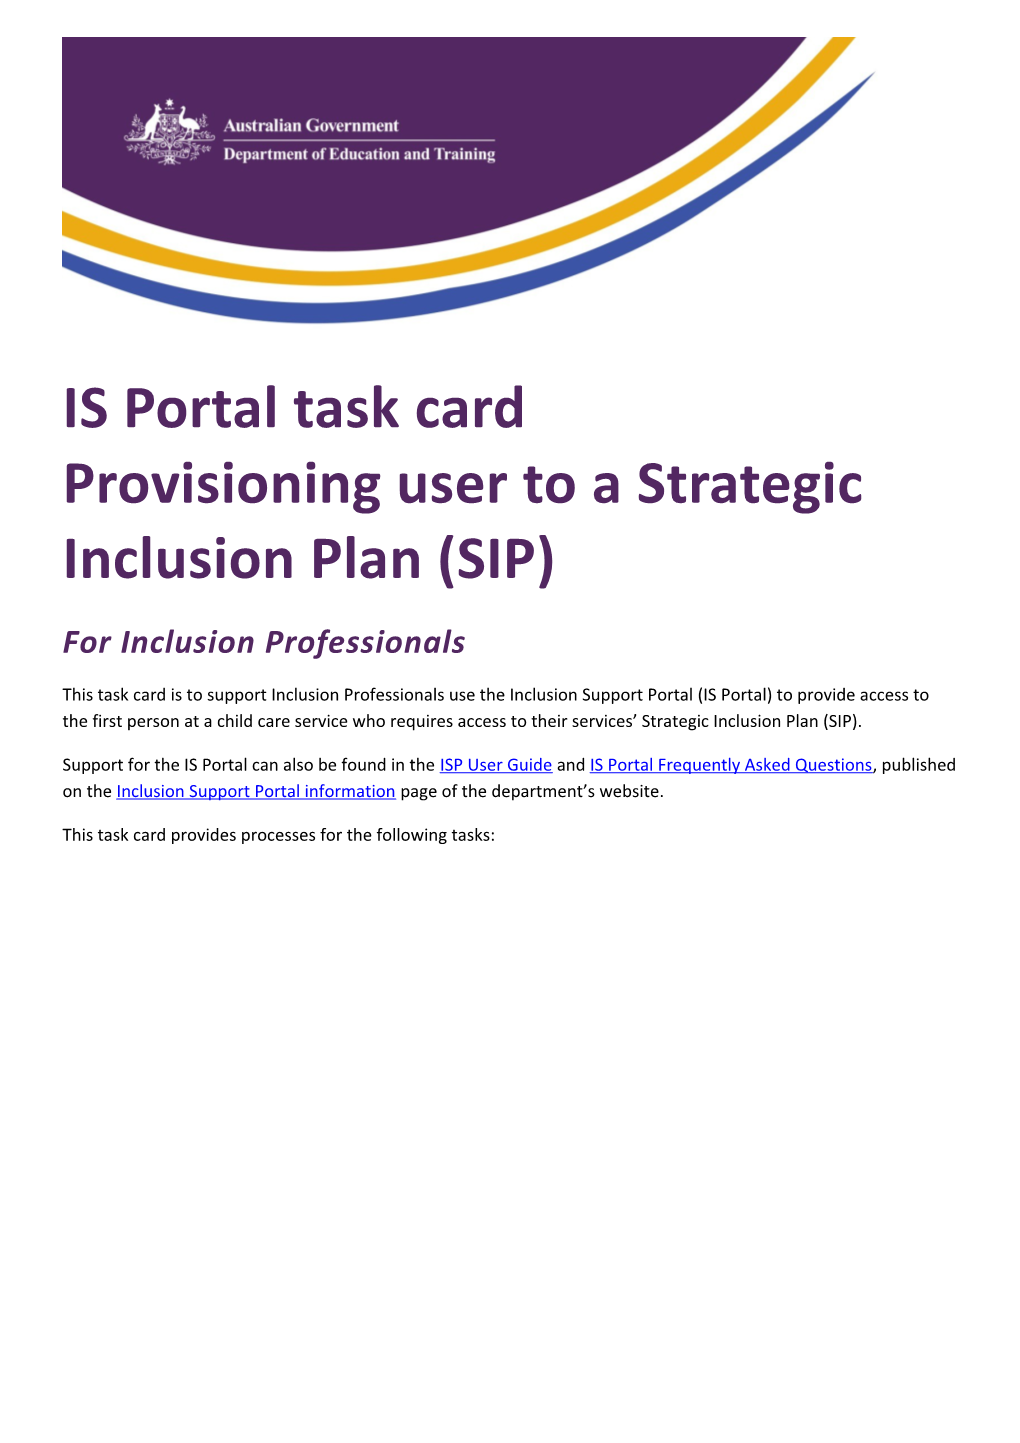 IS Portaltask Card Provisioning User to a Strategic Inclusion Plan (SIP)